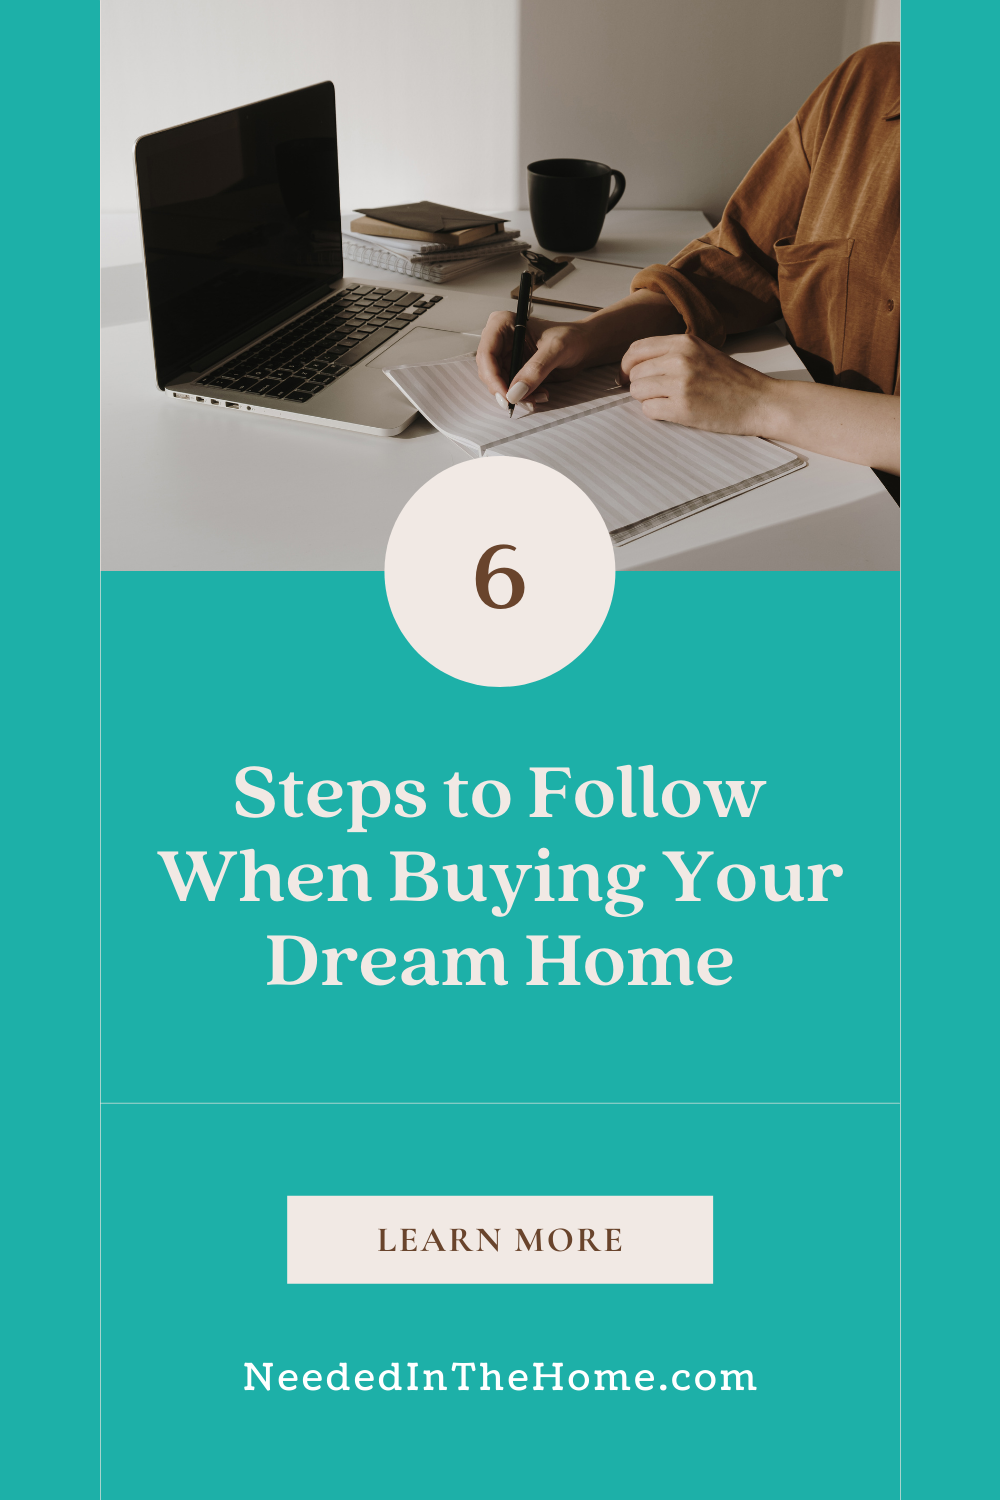 pinterest-pin-description 6 steps to follow when buying your dream home person writing to do list near laptop learn more button neededinthehome